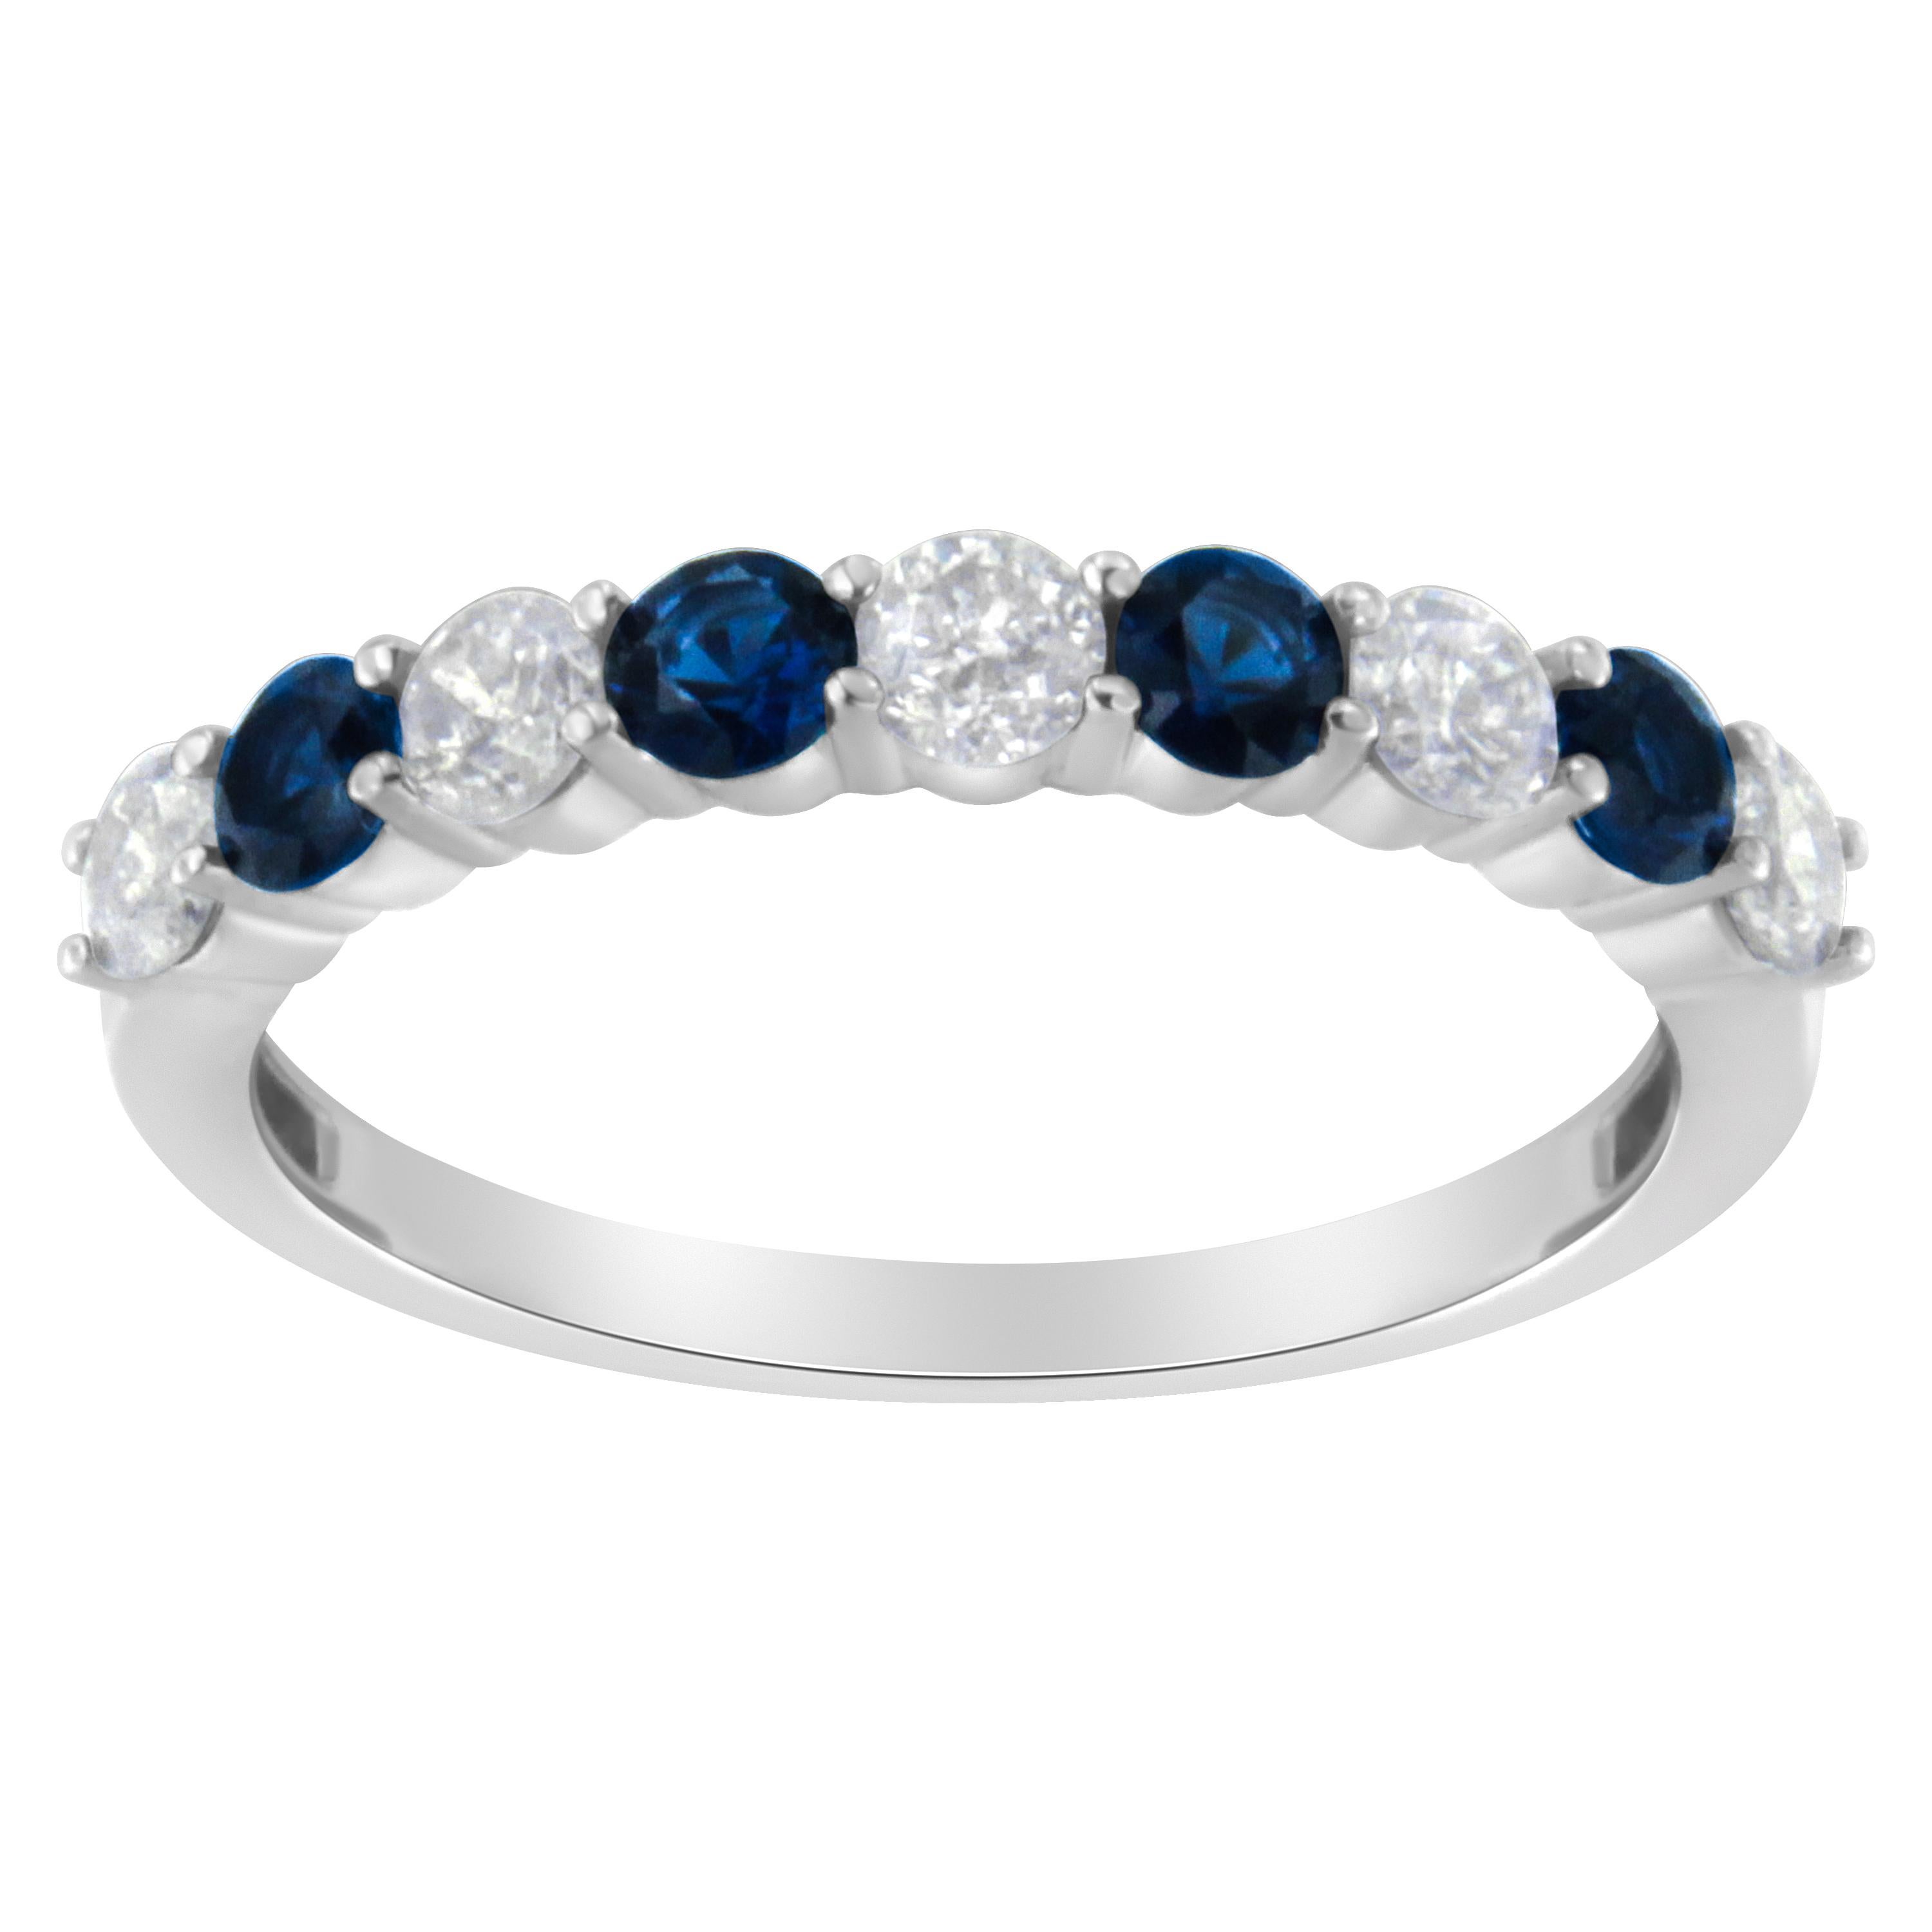 10KT White Gold 1/2 Carat Diamond & 3MM Created Blue Sapphire Gemstone Band Ring For Sale